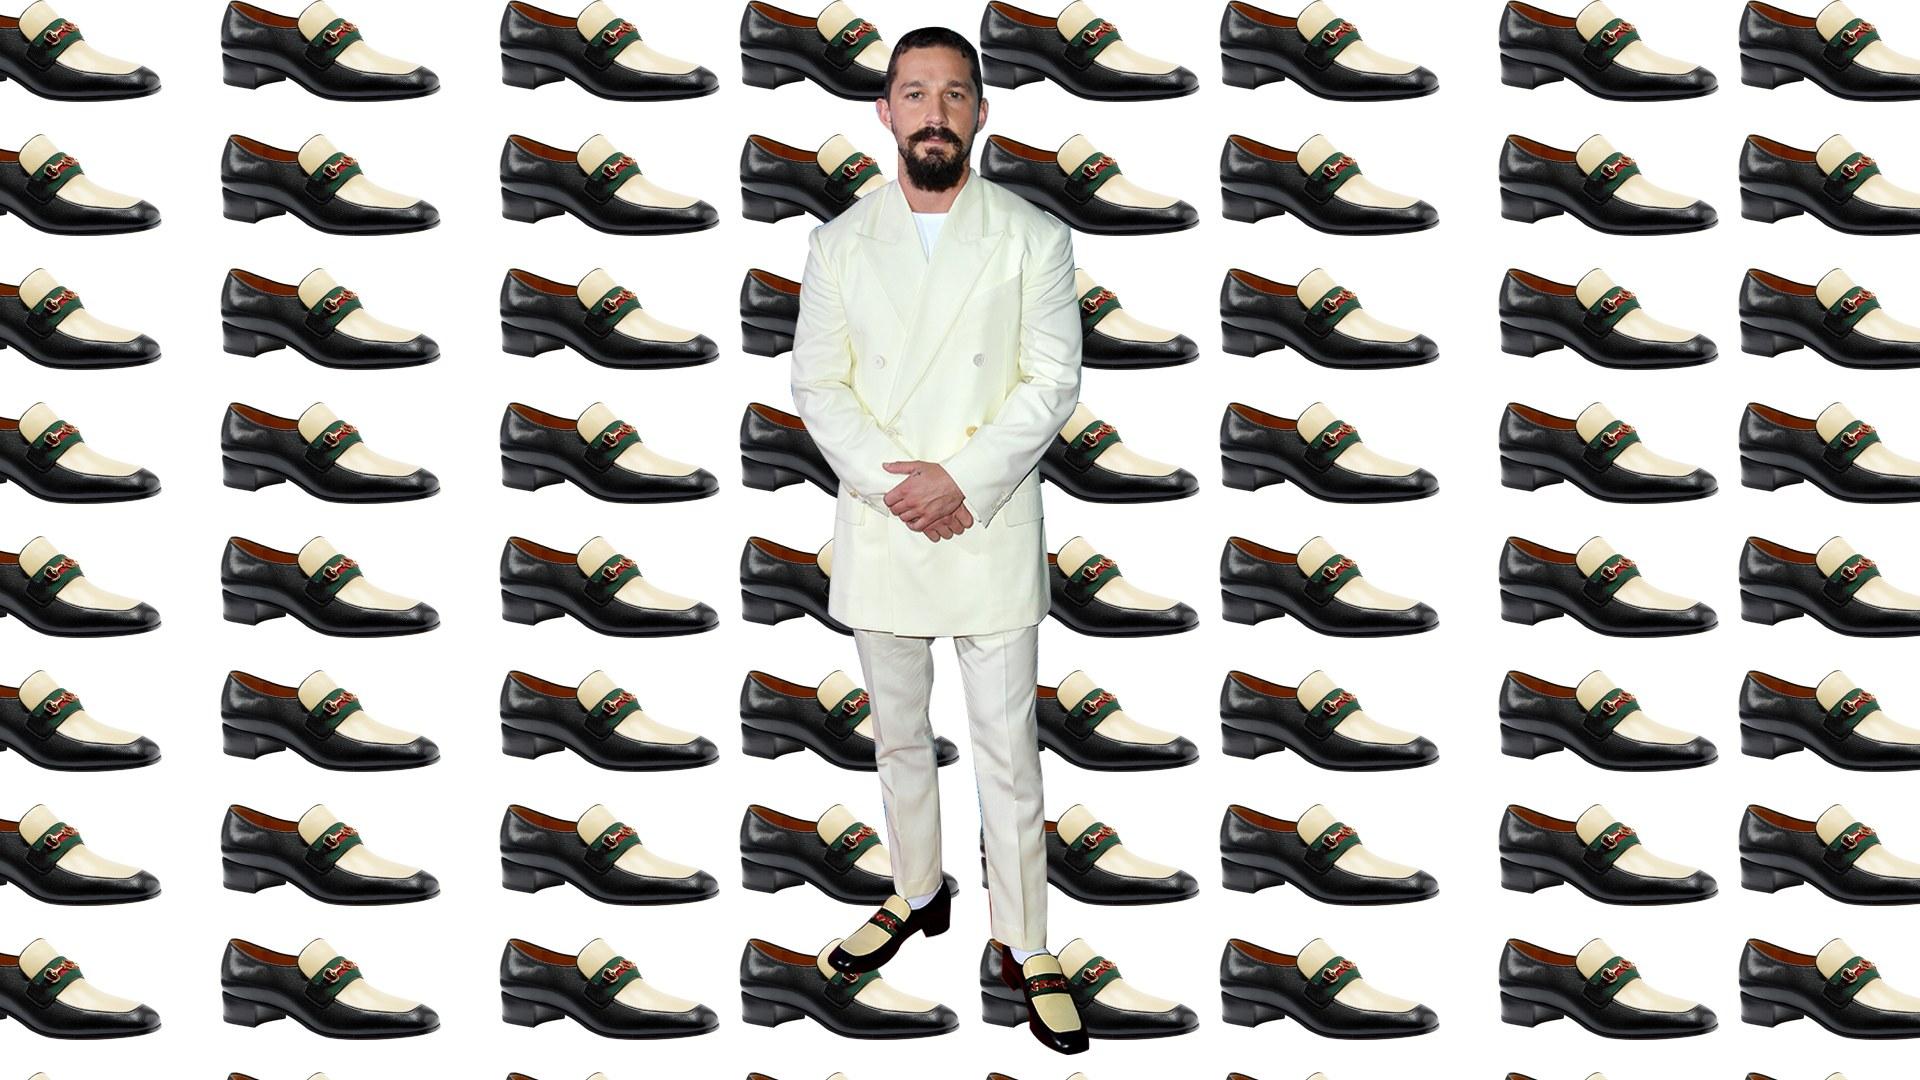 Shia LaBeouf Is the Latest Man to Rock Heels